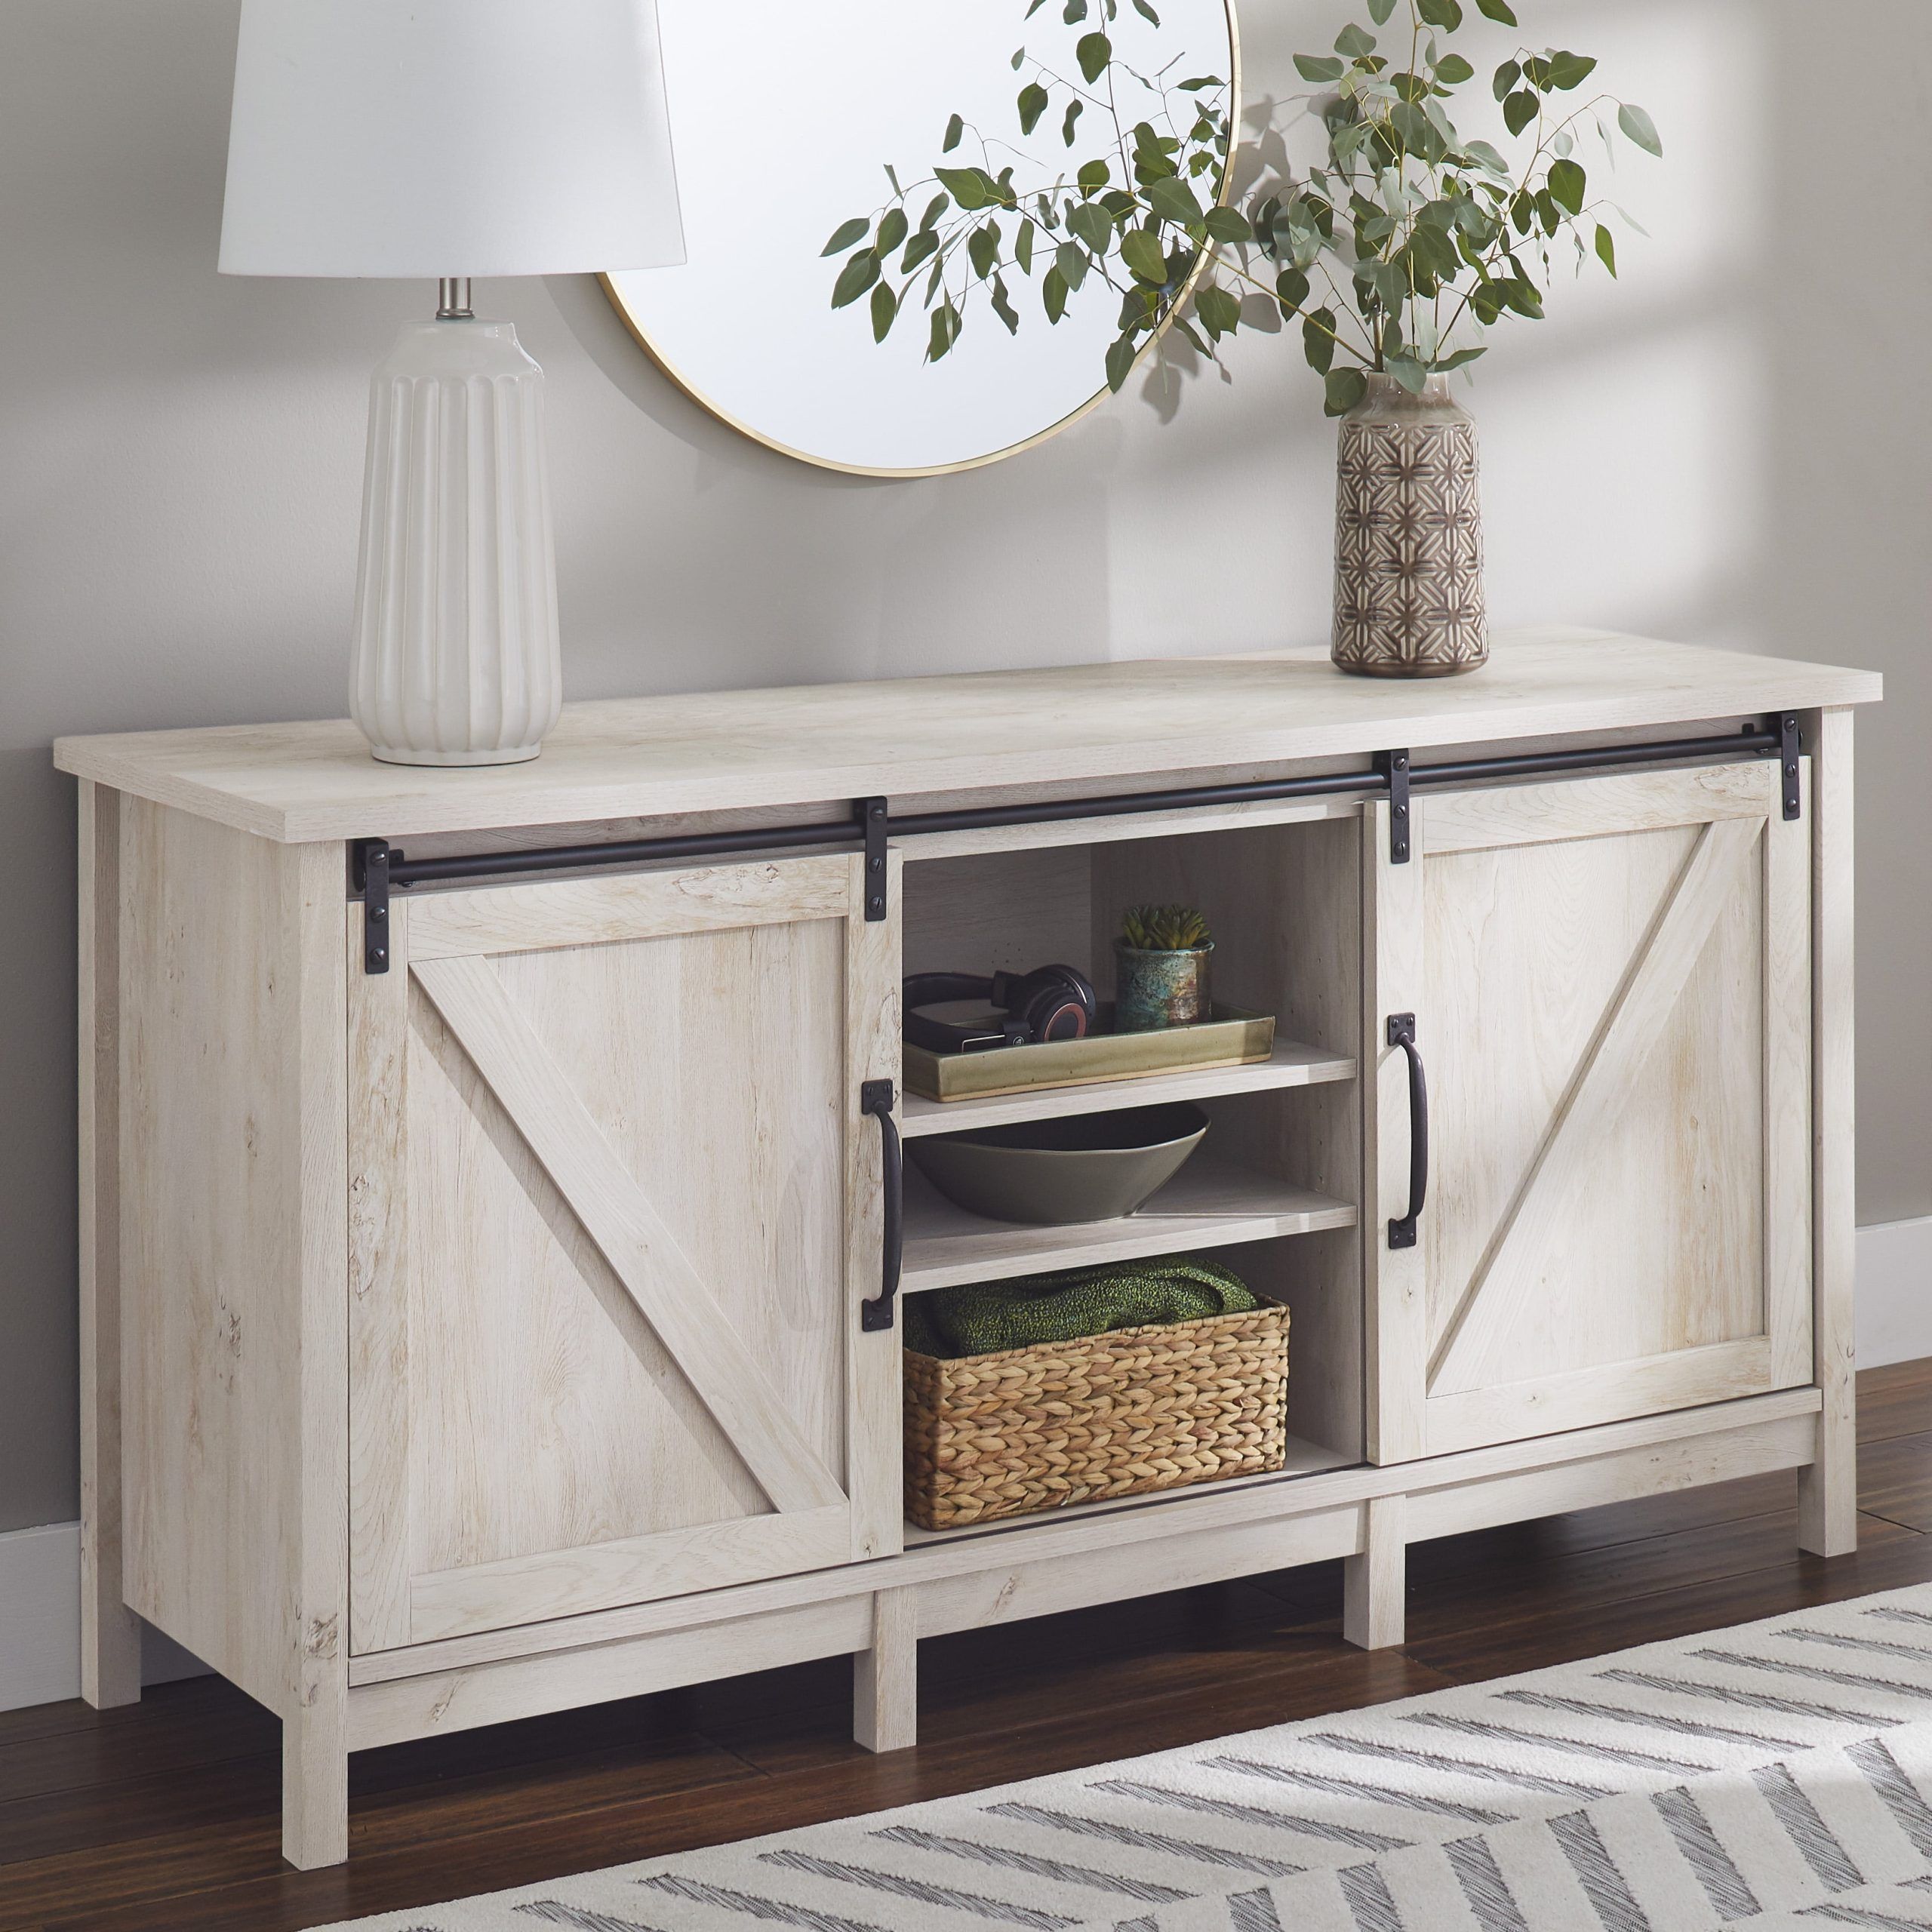 Better Homes & Gardens Modern Farmhouse Tv Stand For Tvs Up To 70", Rustic  White Finish – Walmart With Regard To Modern Farmhouse Rustic Tv Stands (View 8 of 15)